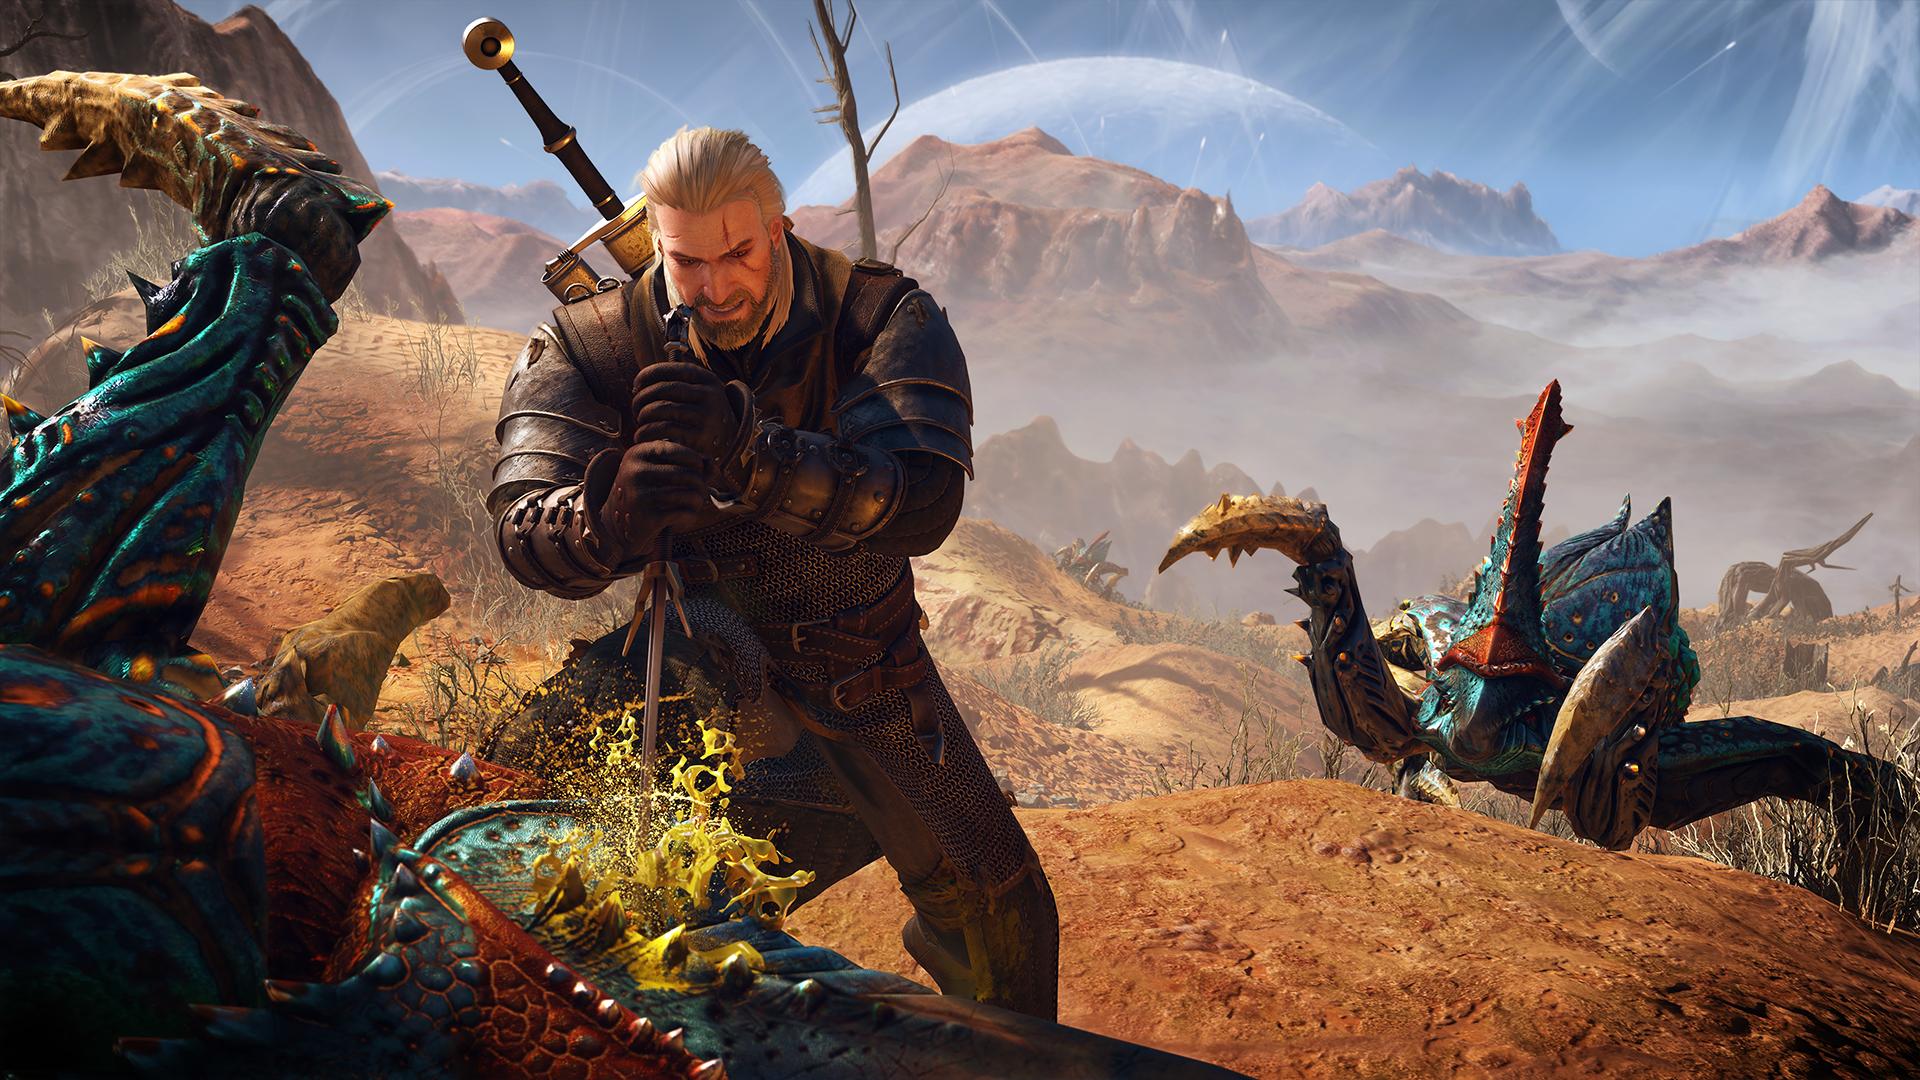 The Witcher 3: Wild Hunt single-player game